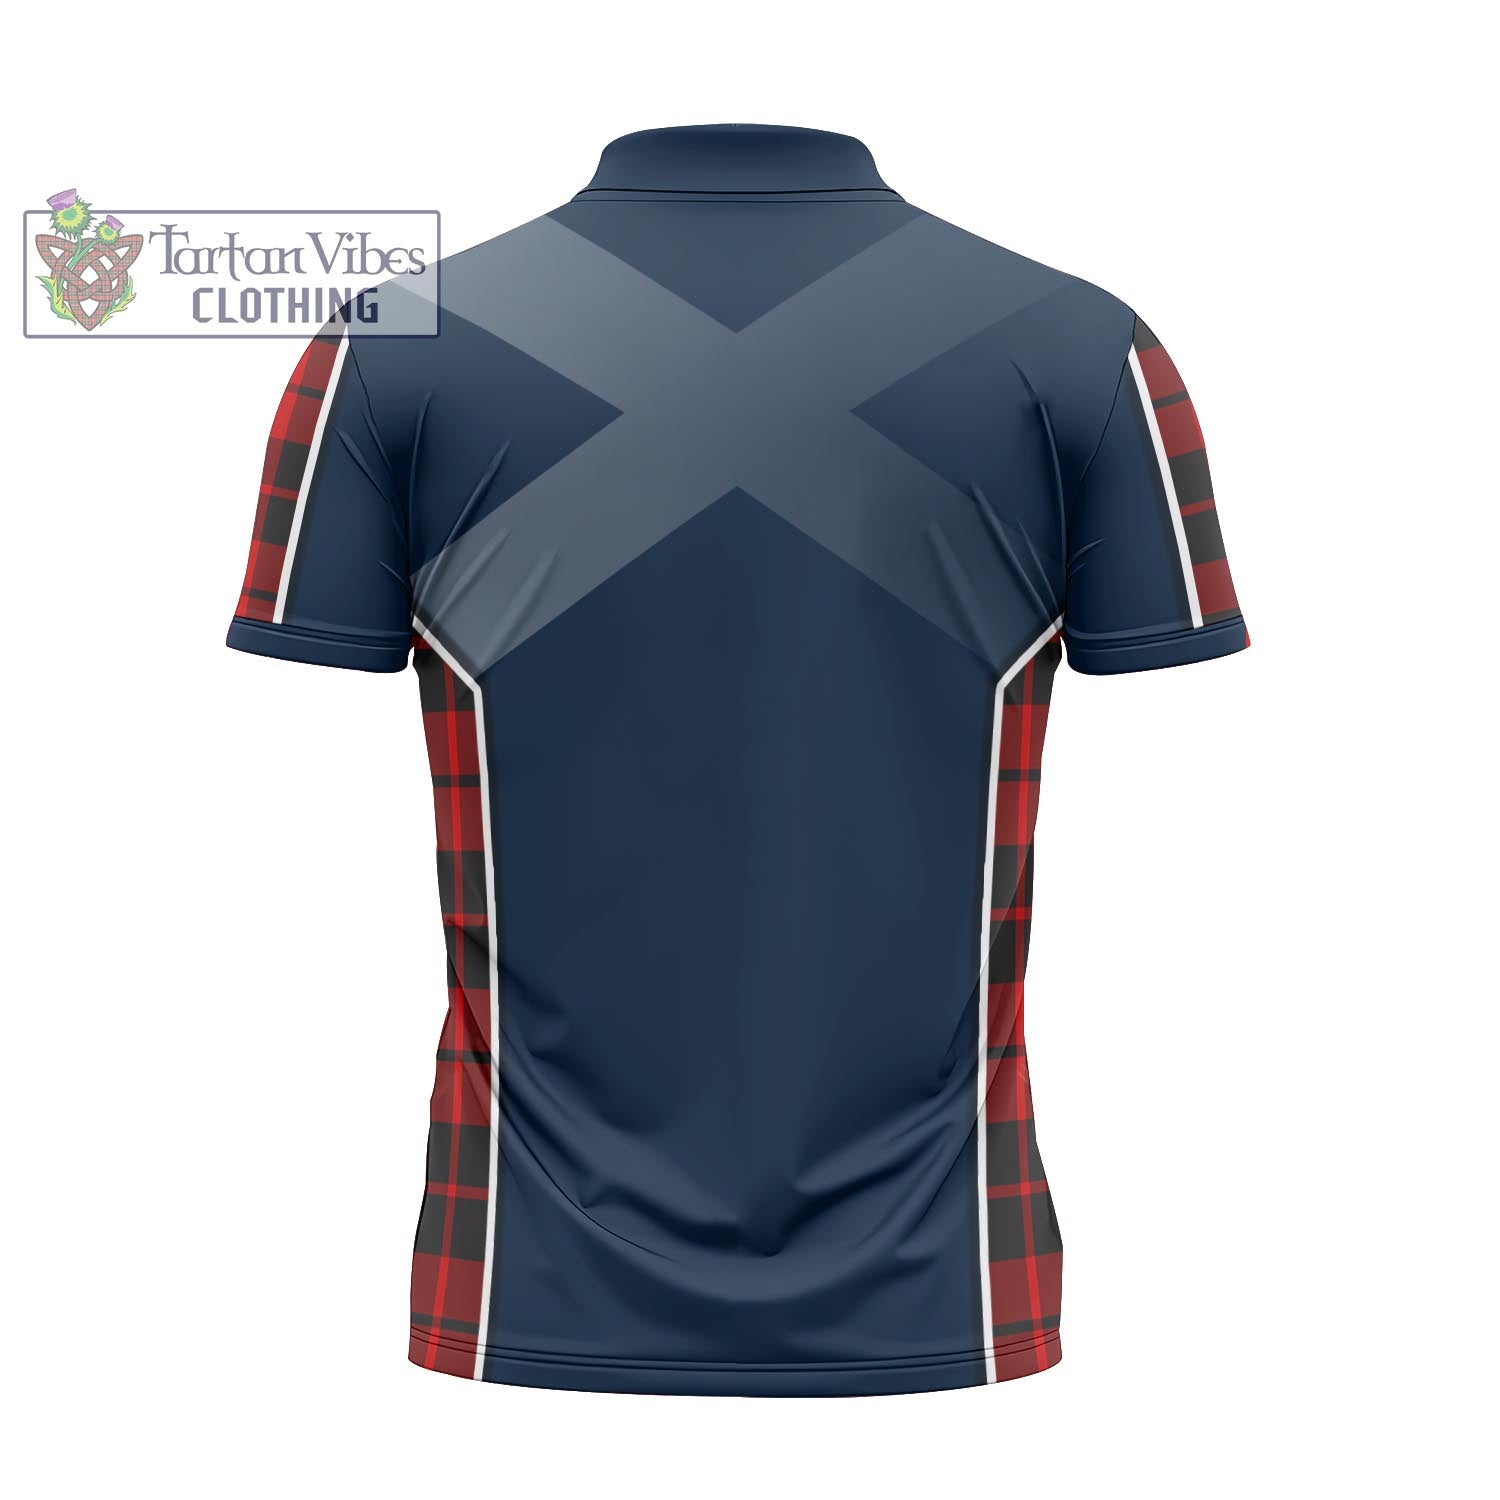 Tartan Vibes Clothing Hogg Tartan Zipper Polo Shirt with Family Crest and Scottish Thistle Vibes Sport Style